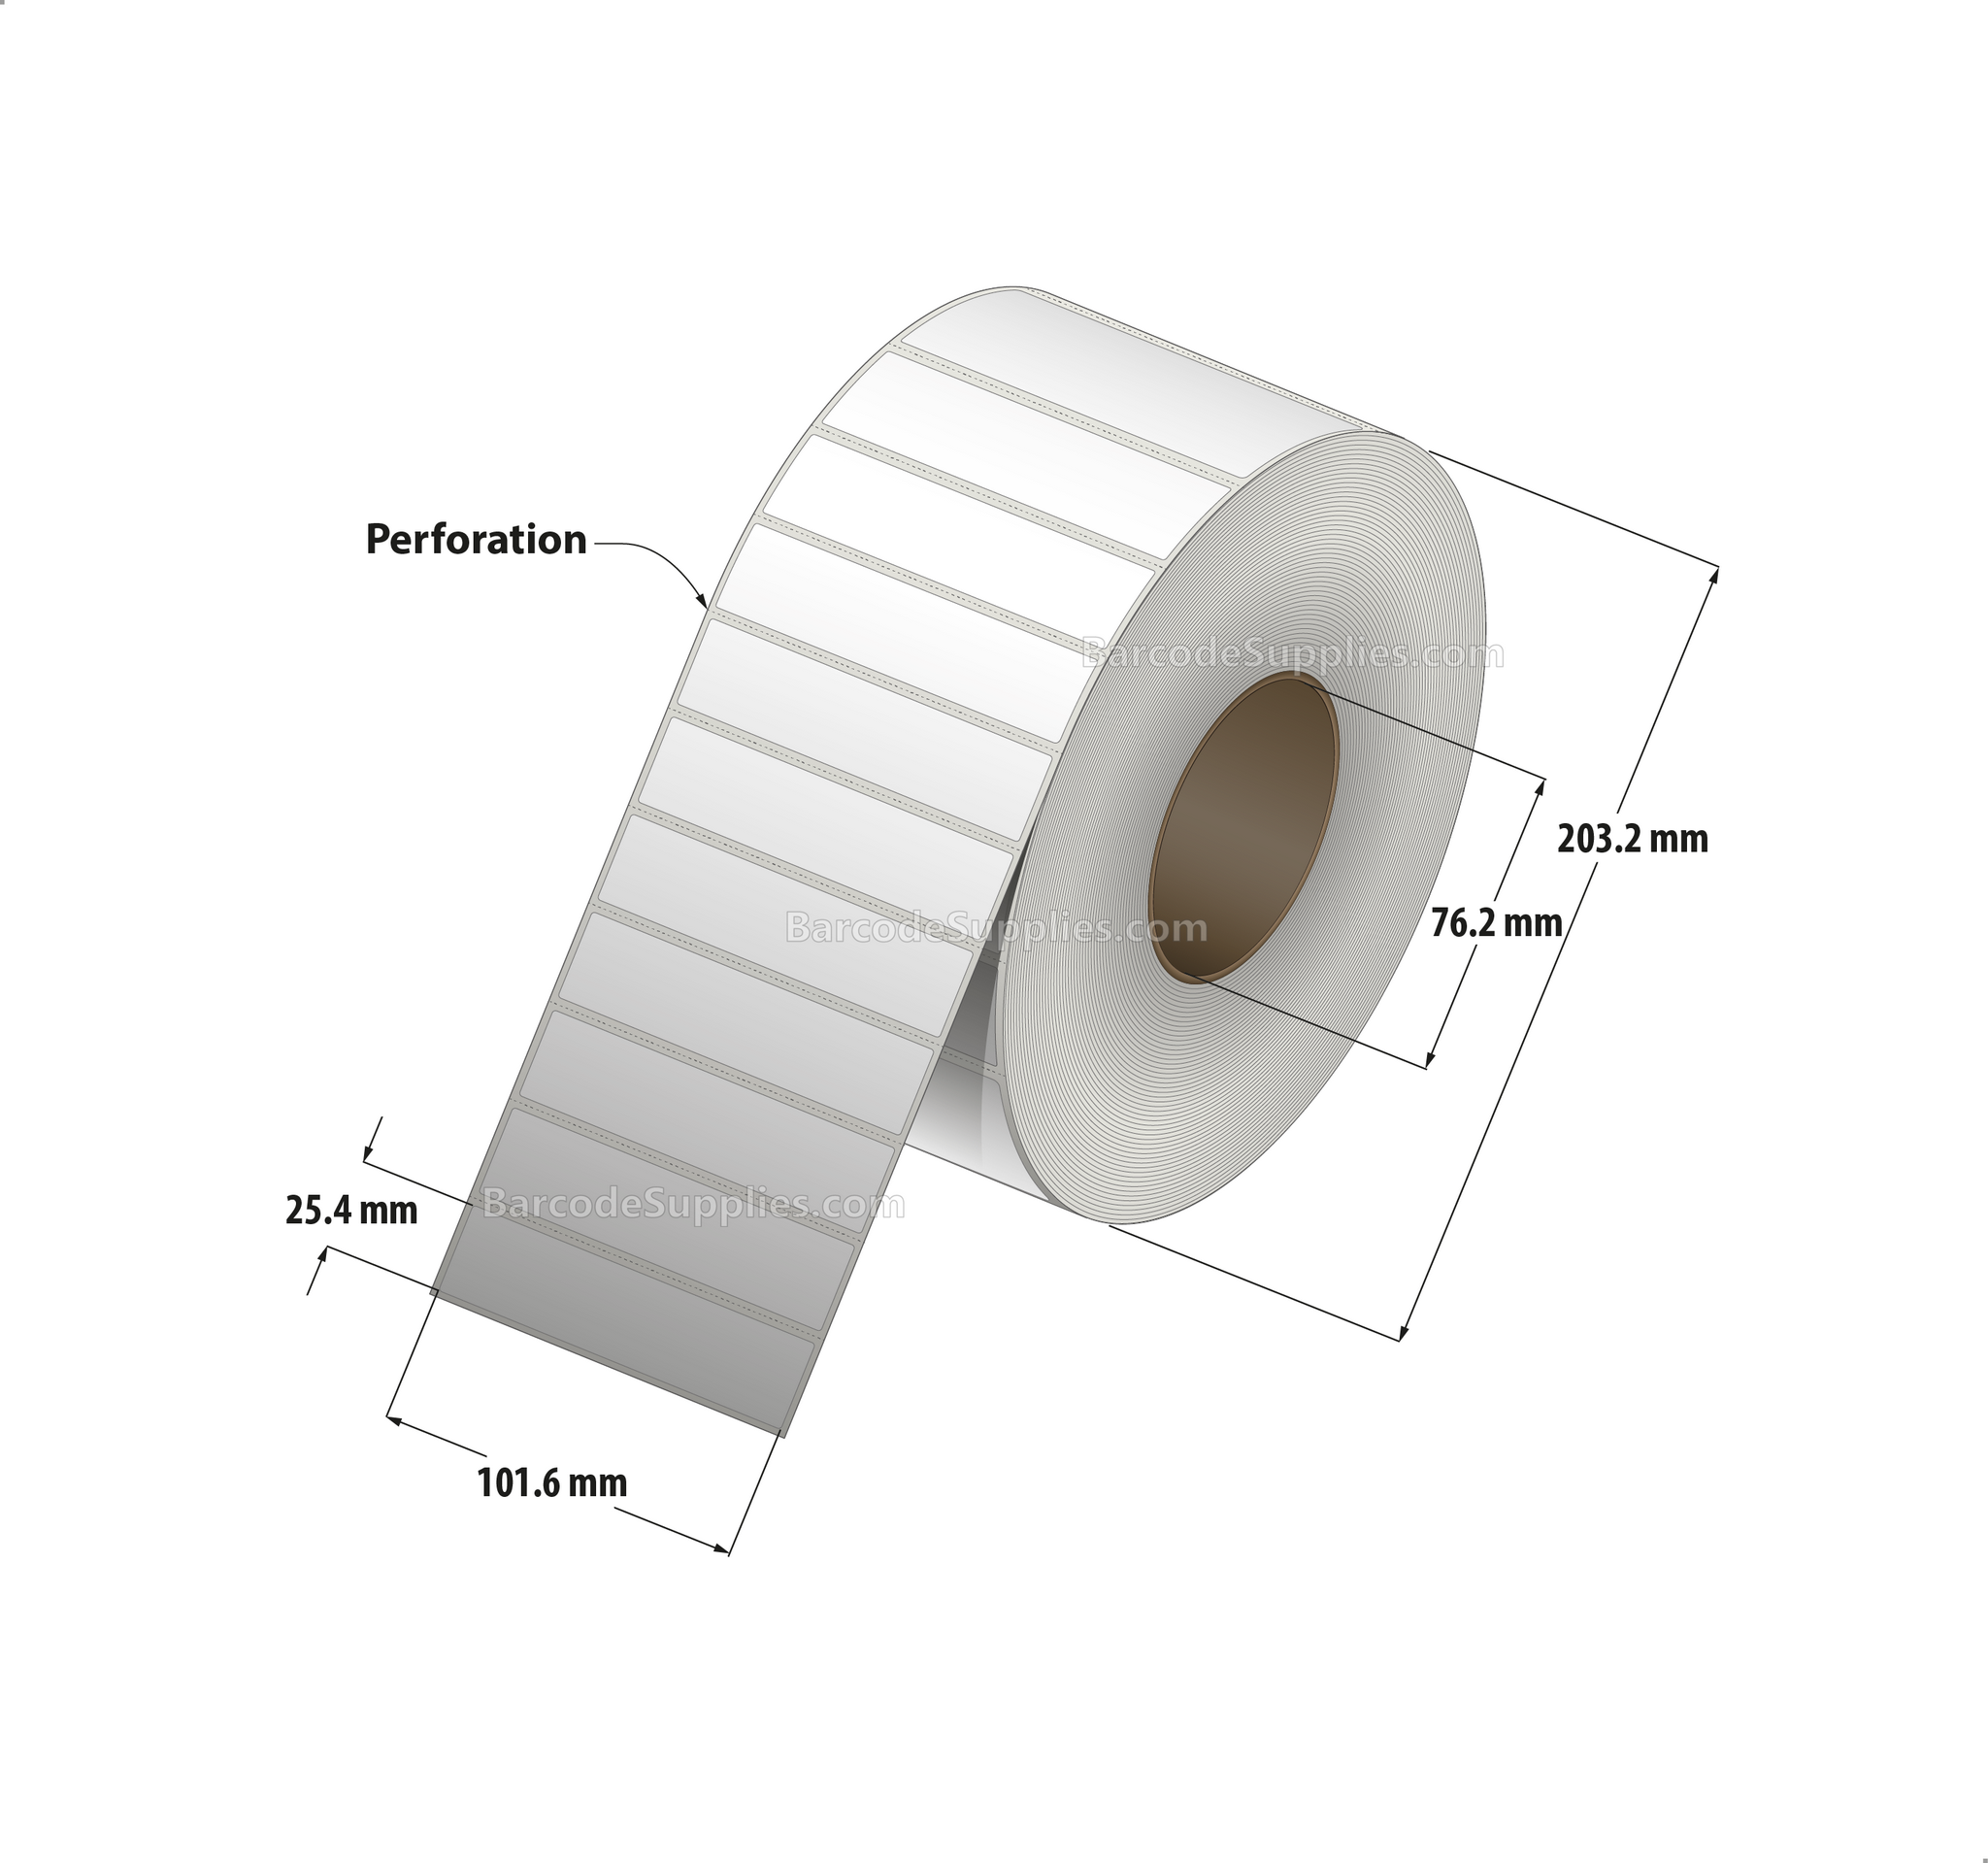 4 x 1 Thermal Transfer White Labels With Permanent Adhesive - Perforated - 5500 Labels Per Roll - Carton Of 4 Rolls - 22000 Labels Total - MPN: RT-4-1-5500-3